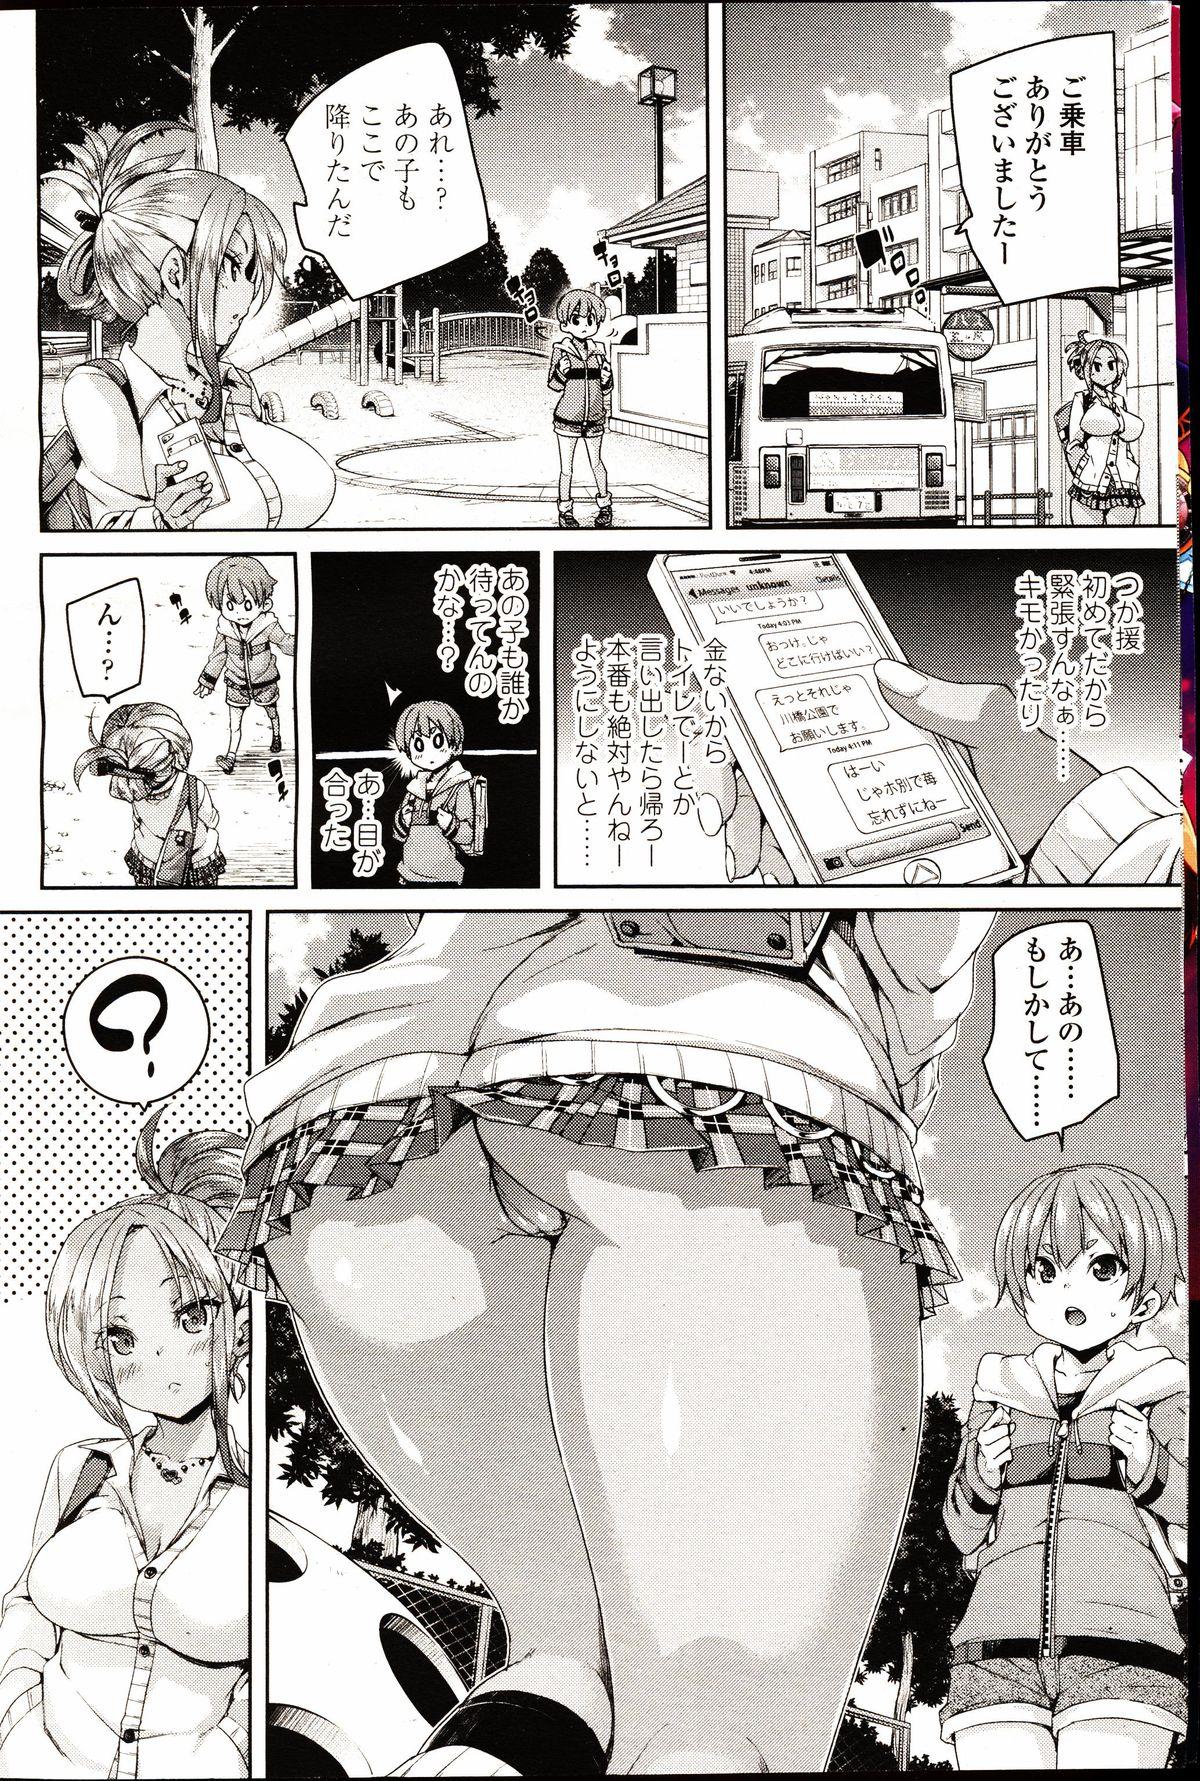 Thot Girls forM Vol. 09 Nice - Page 6